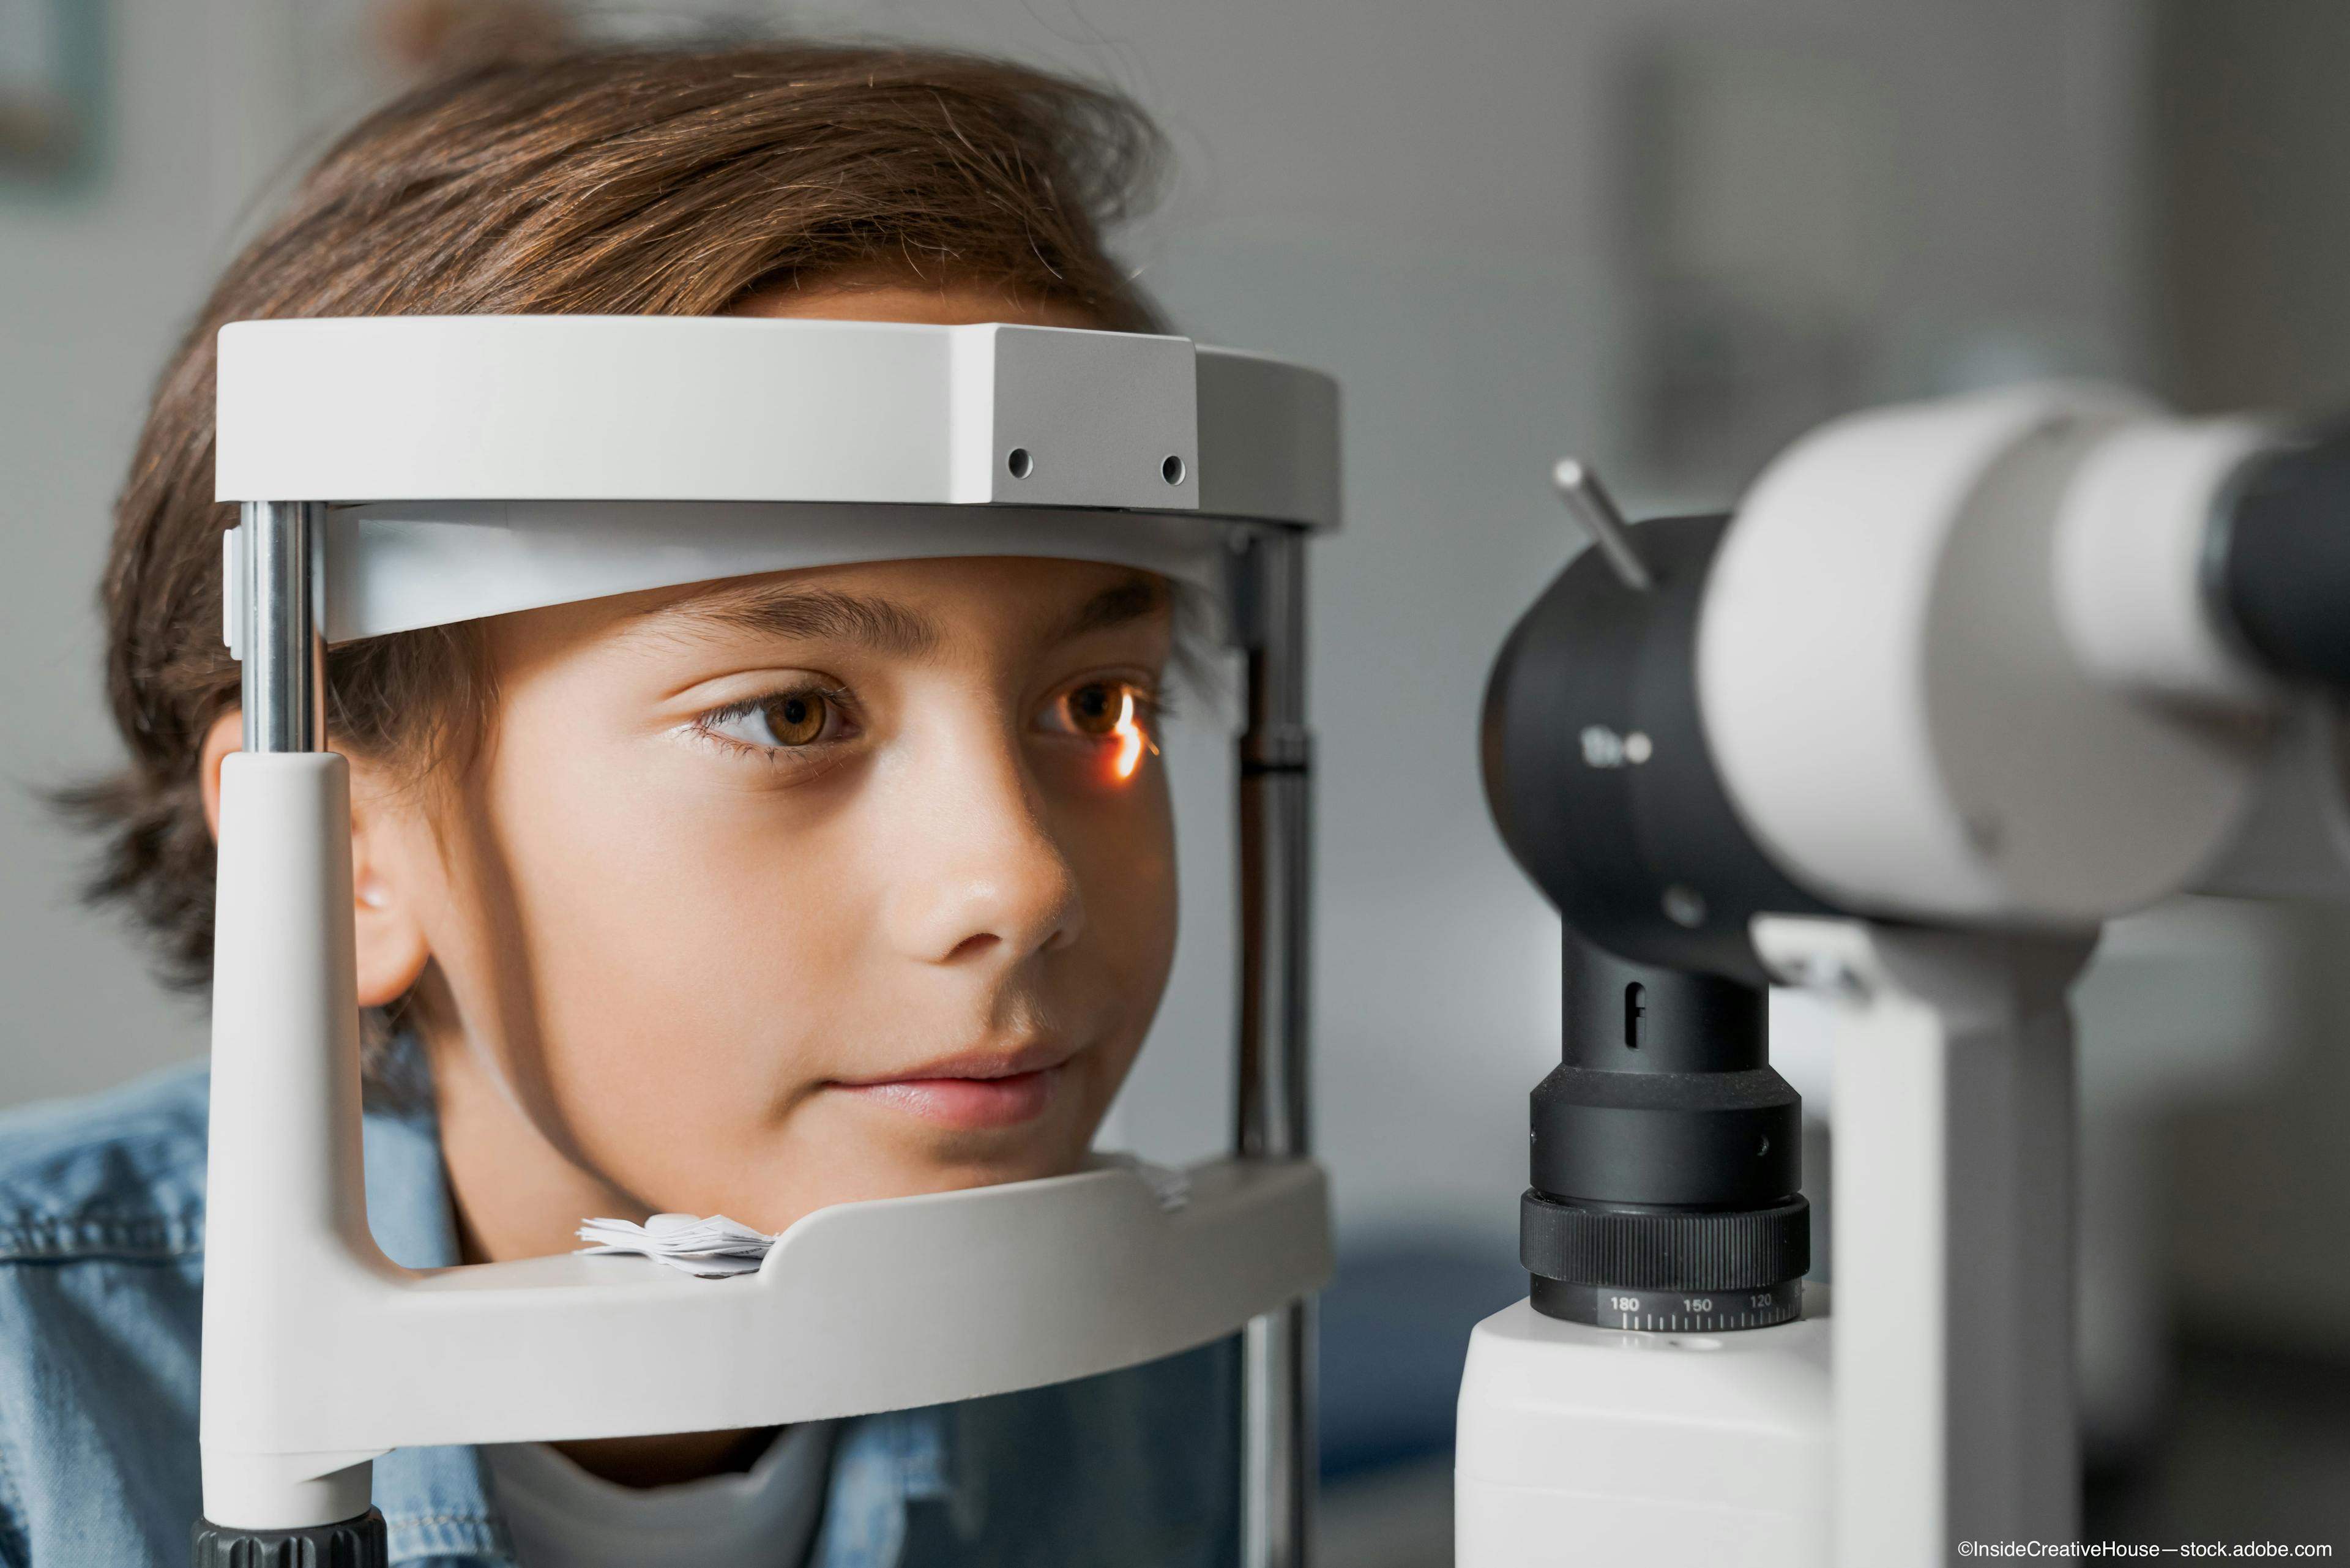 Cerebral visual impairment: Getting to the heart of paediatric vision loss